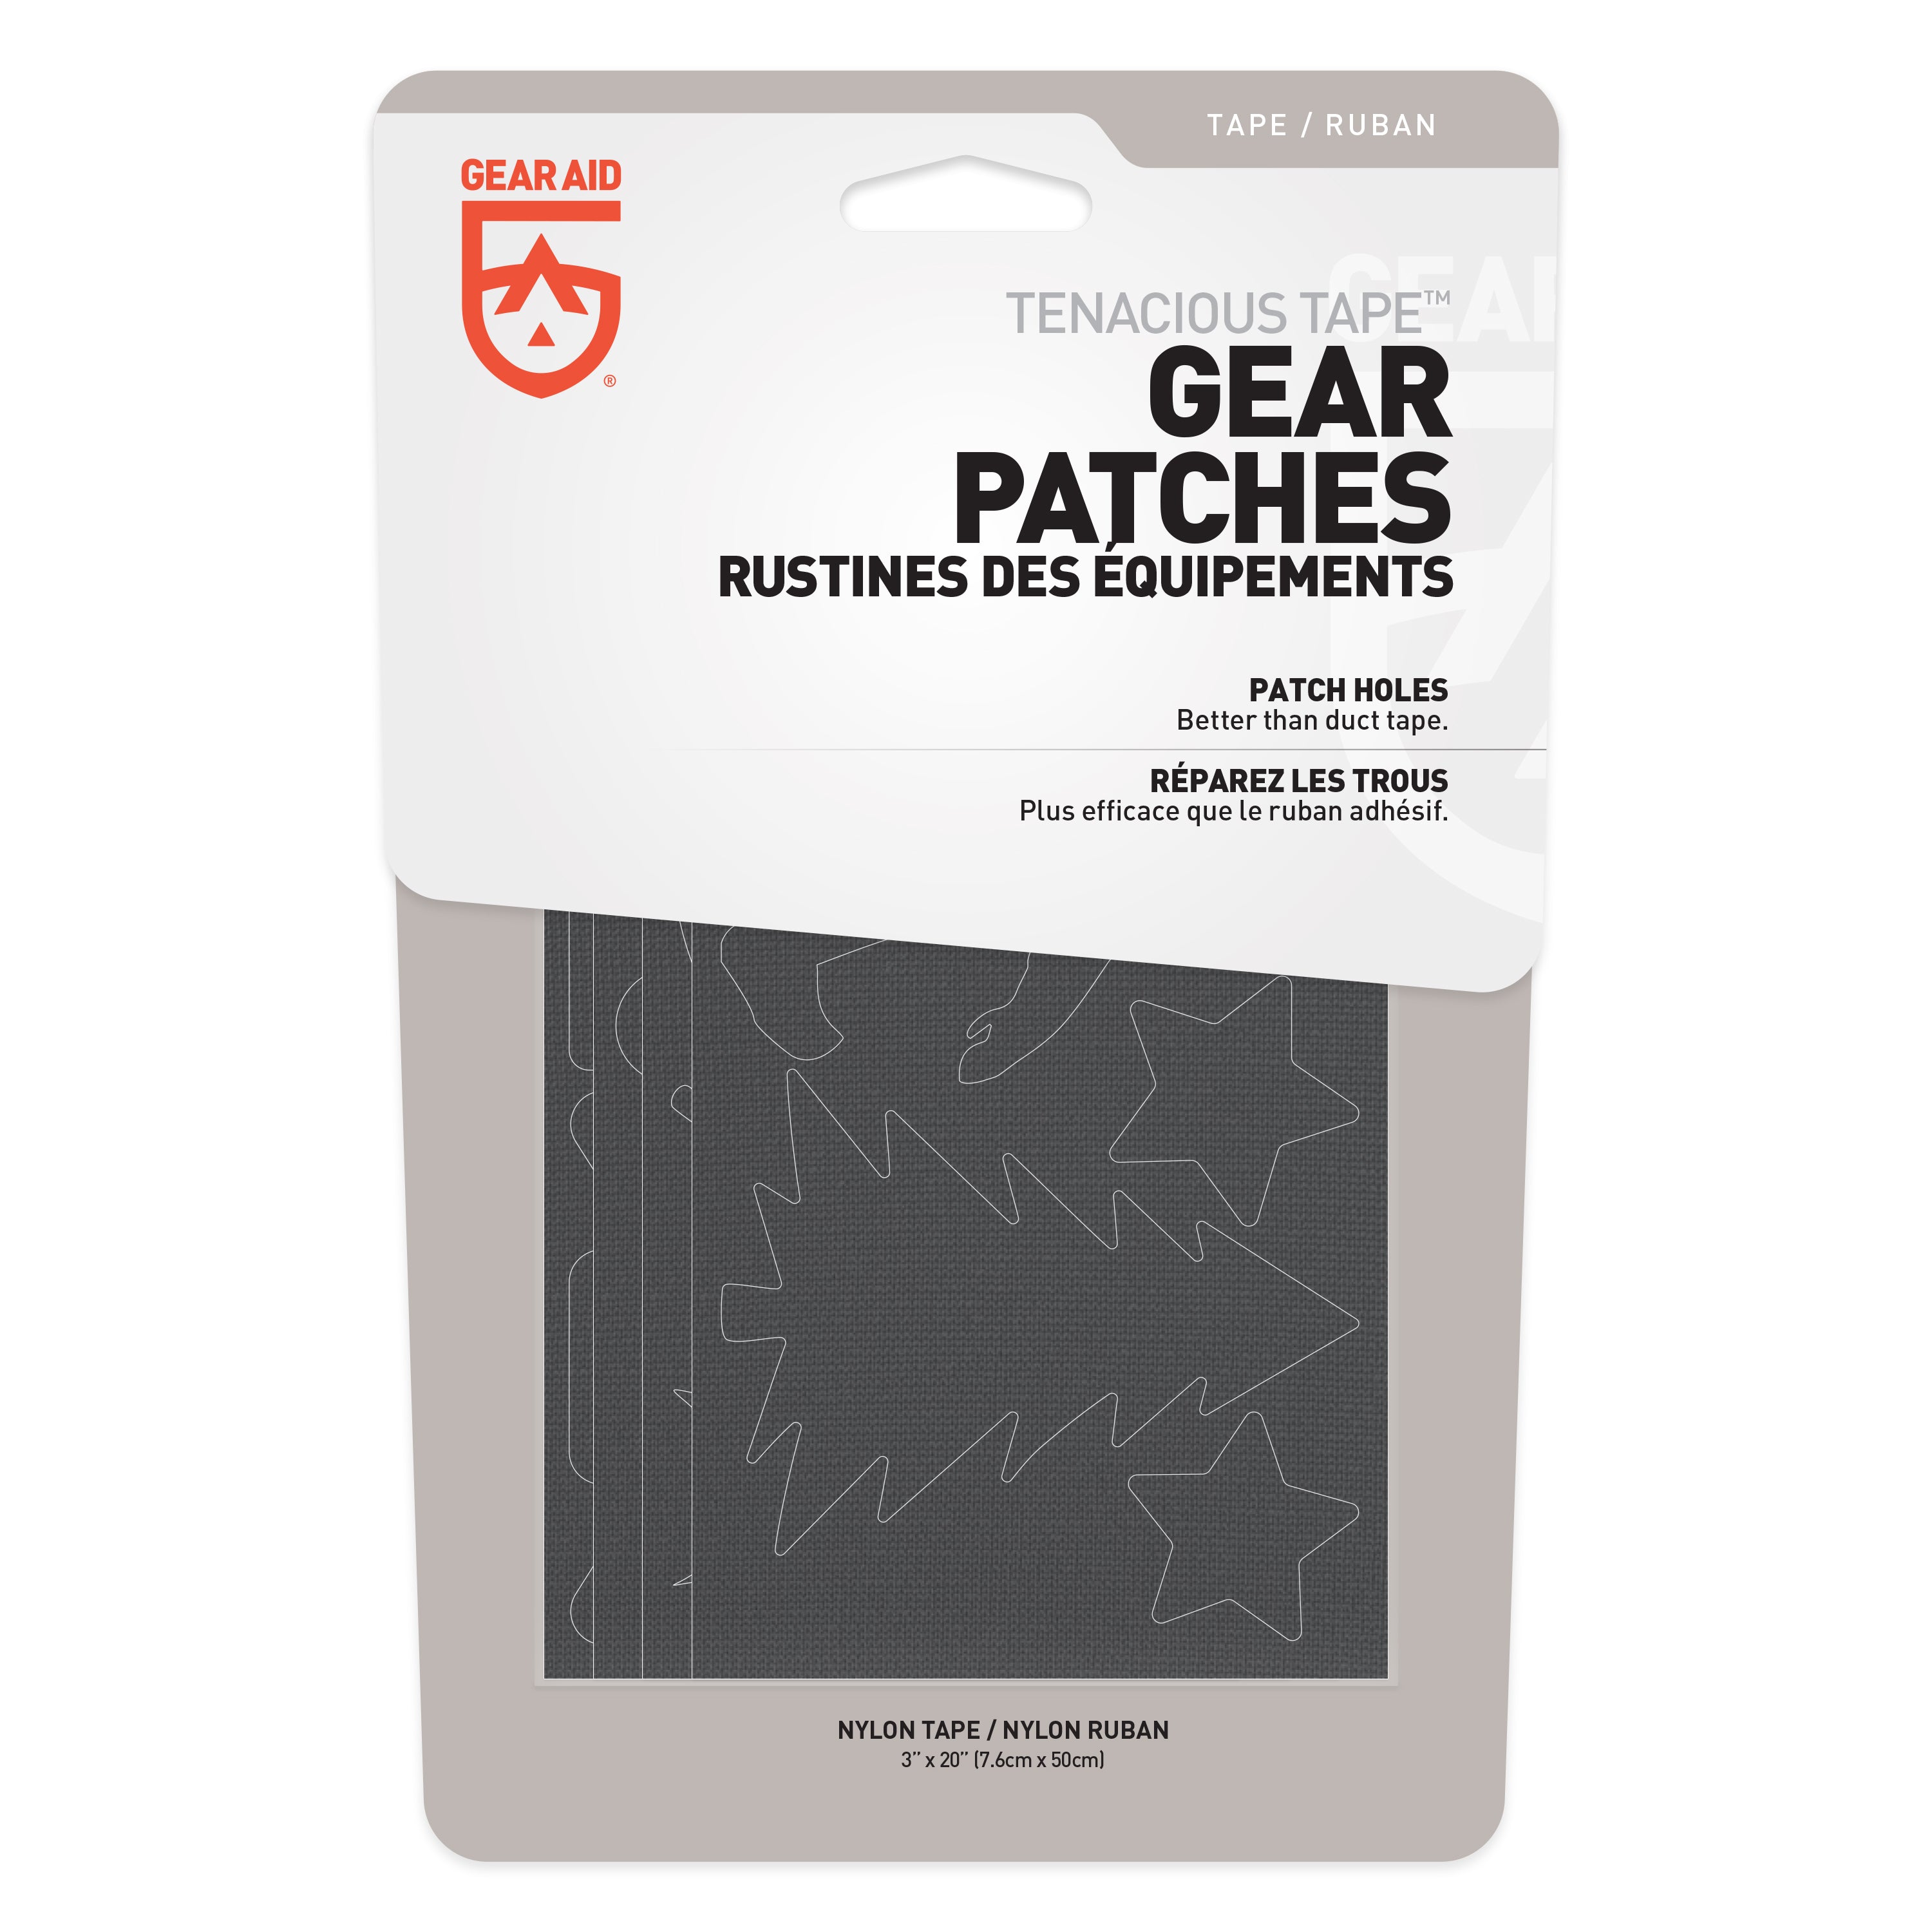 Leather Repair Patch Review 2021 - Easy, Durable and Waterproof